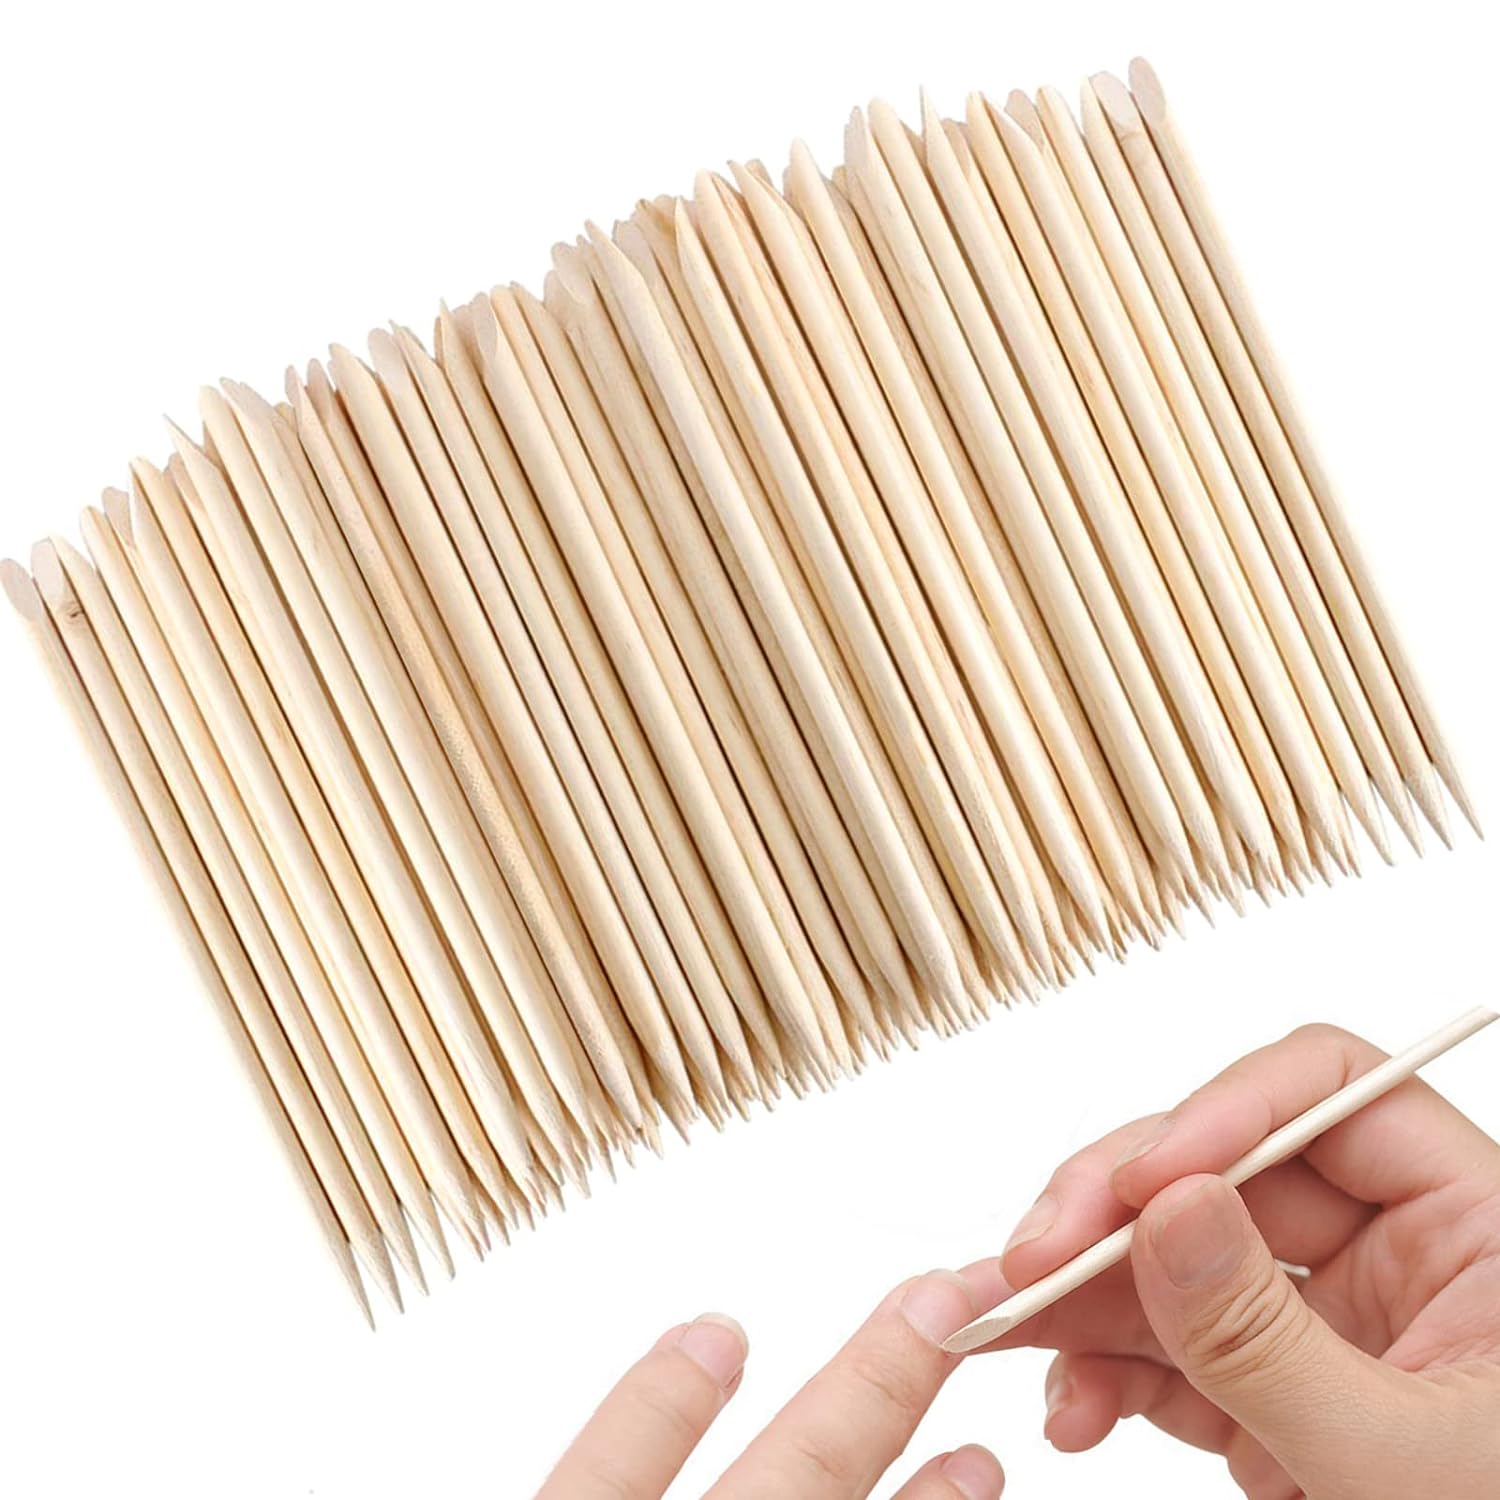 AMAHOMESA Sticks for Nails, Orange Wood Nail Sticks Double Sided Multi Functional Cuticle Pusher Remover Manicure Pedicure Tool (100pcs)